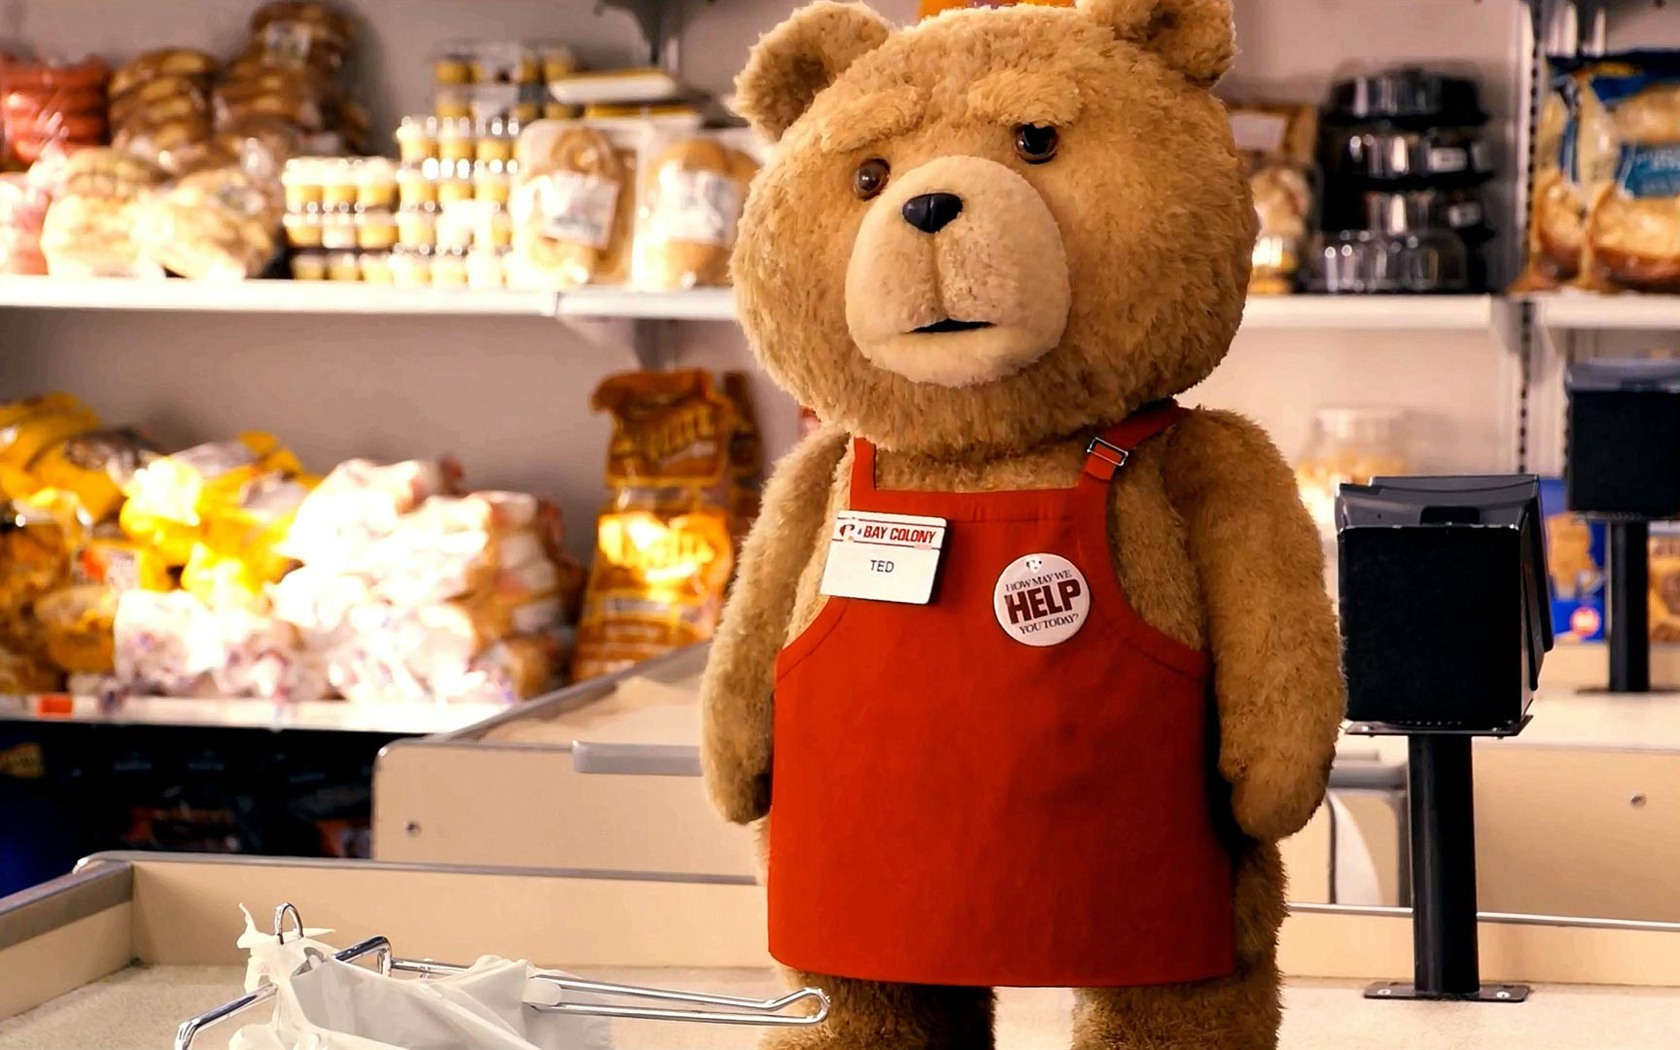 Ted 2012 HD movie wallpapers #14 - 1680x1050